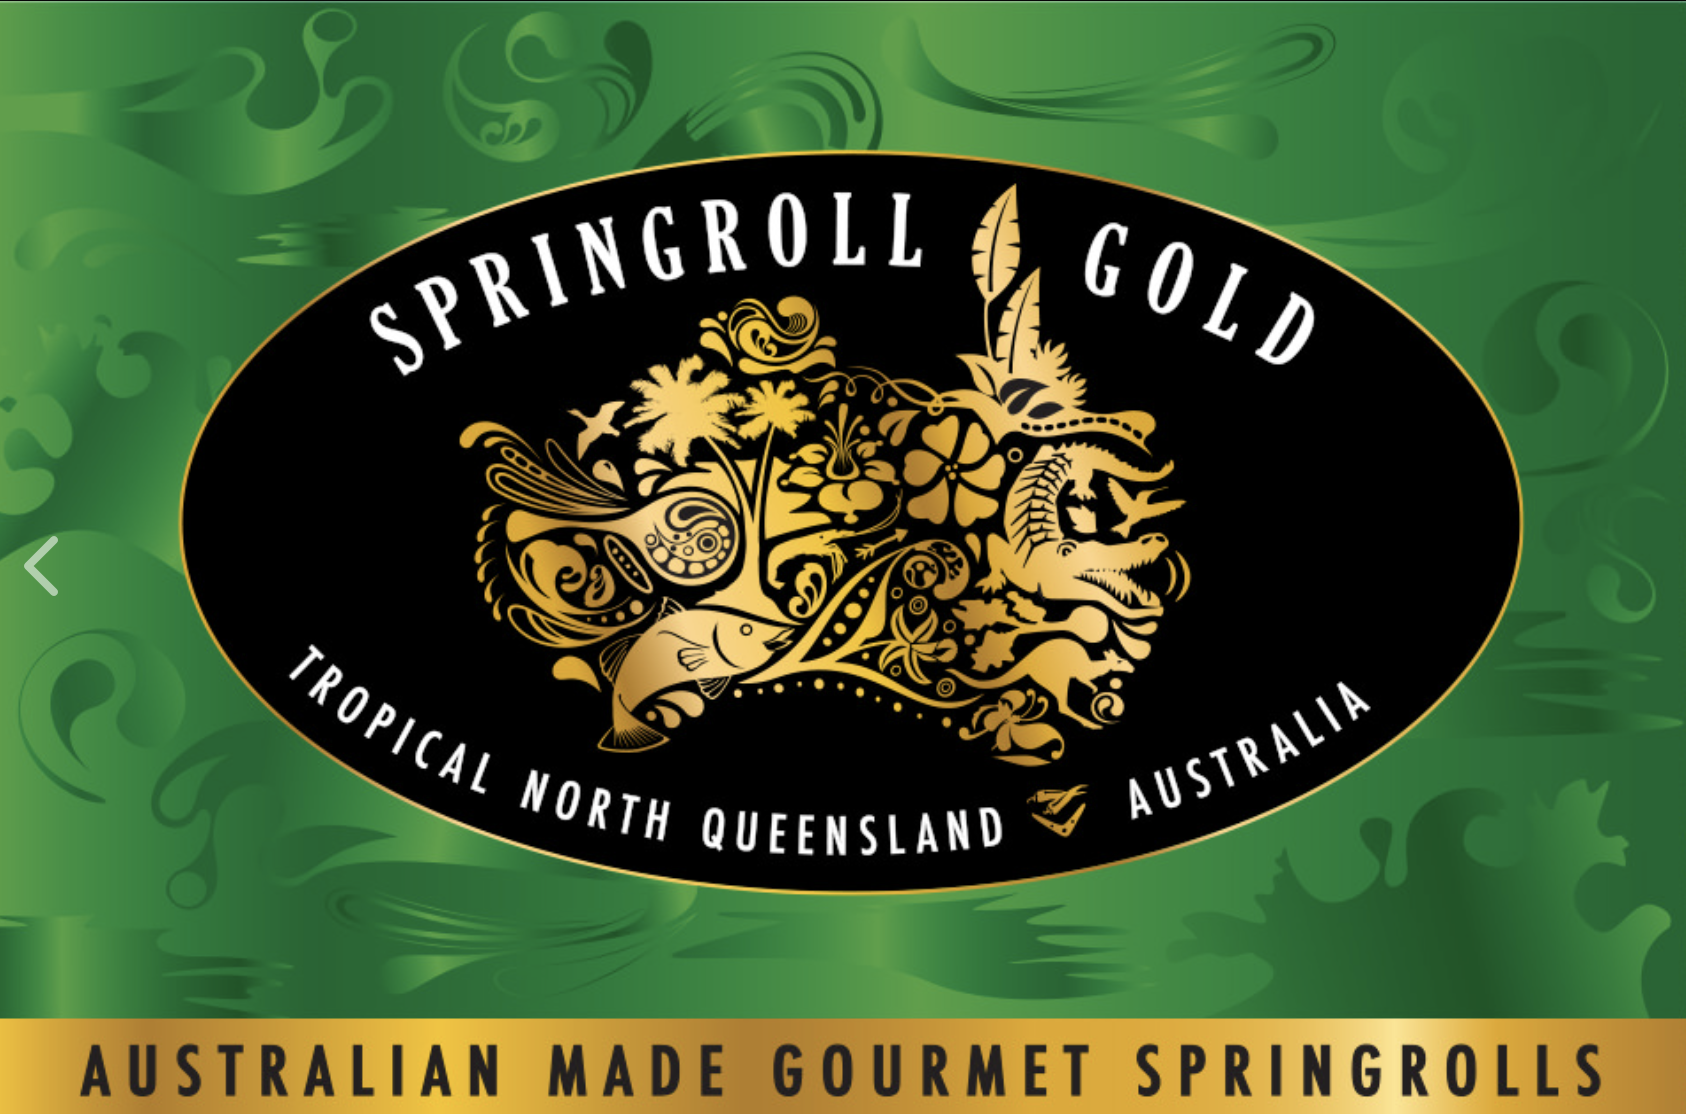 Rolling into Action with Springroll Gold for Rural Aid!